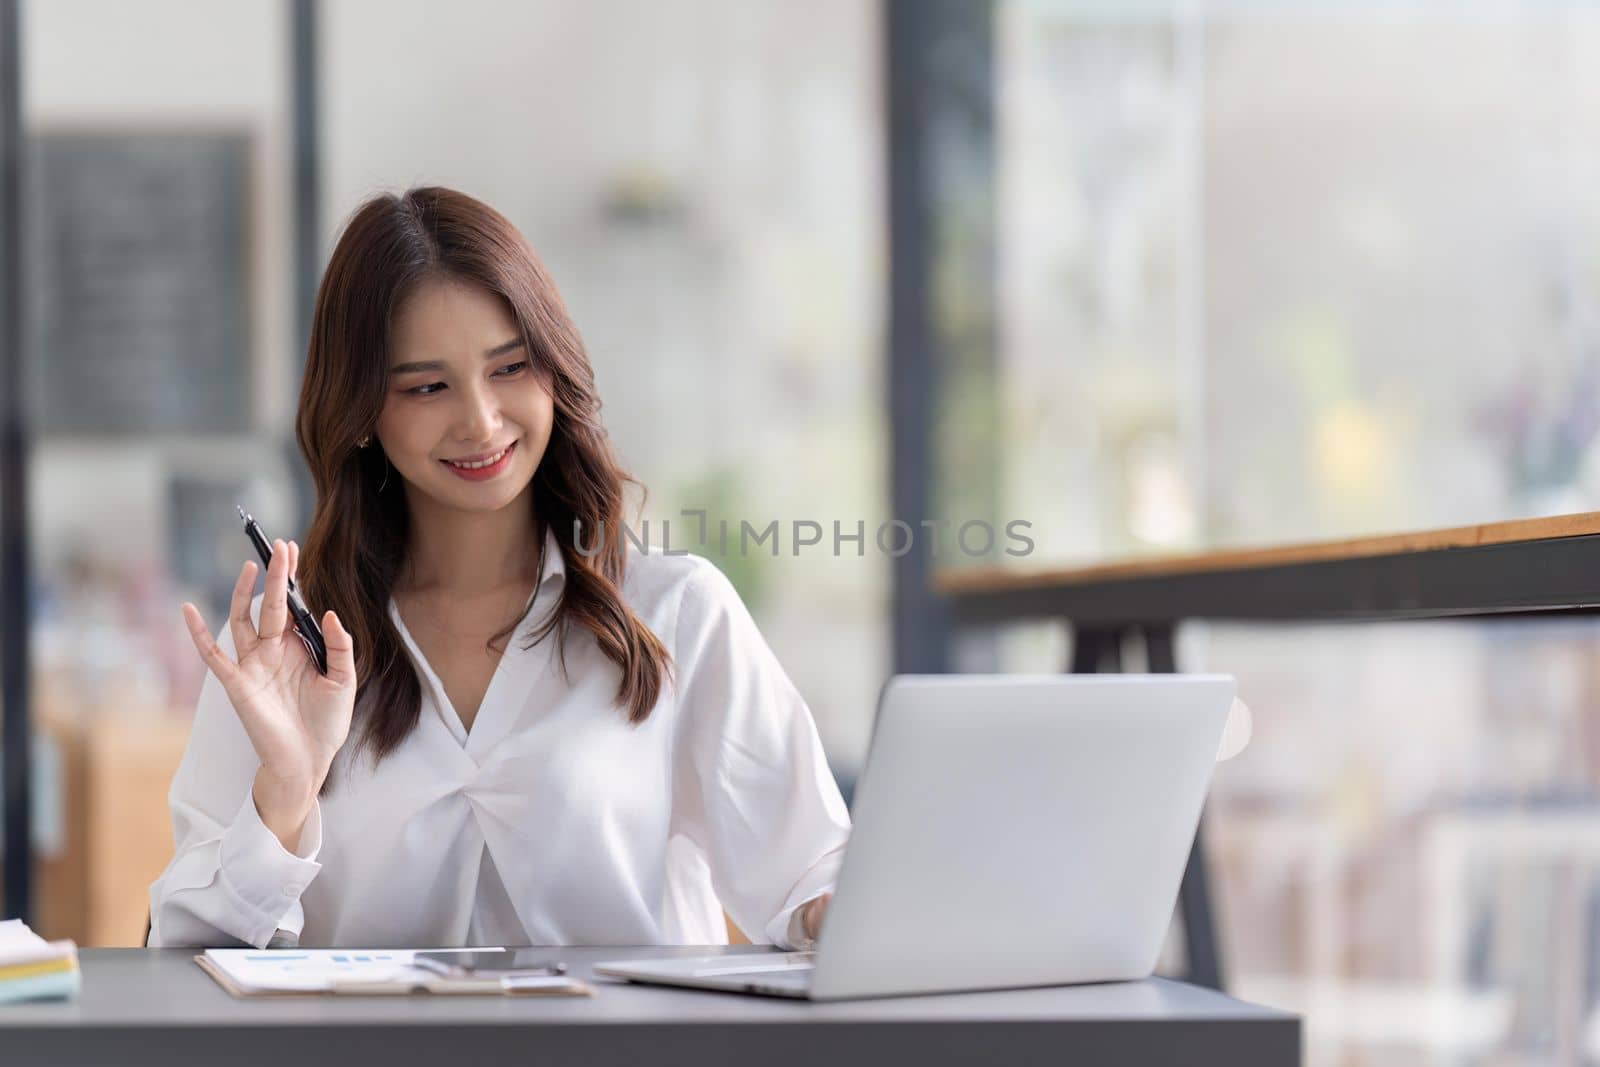 Business woman working on laptop and working at office desk at office.